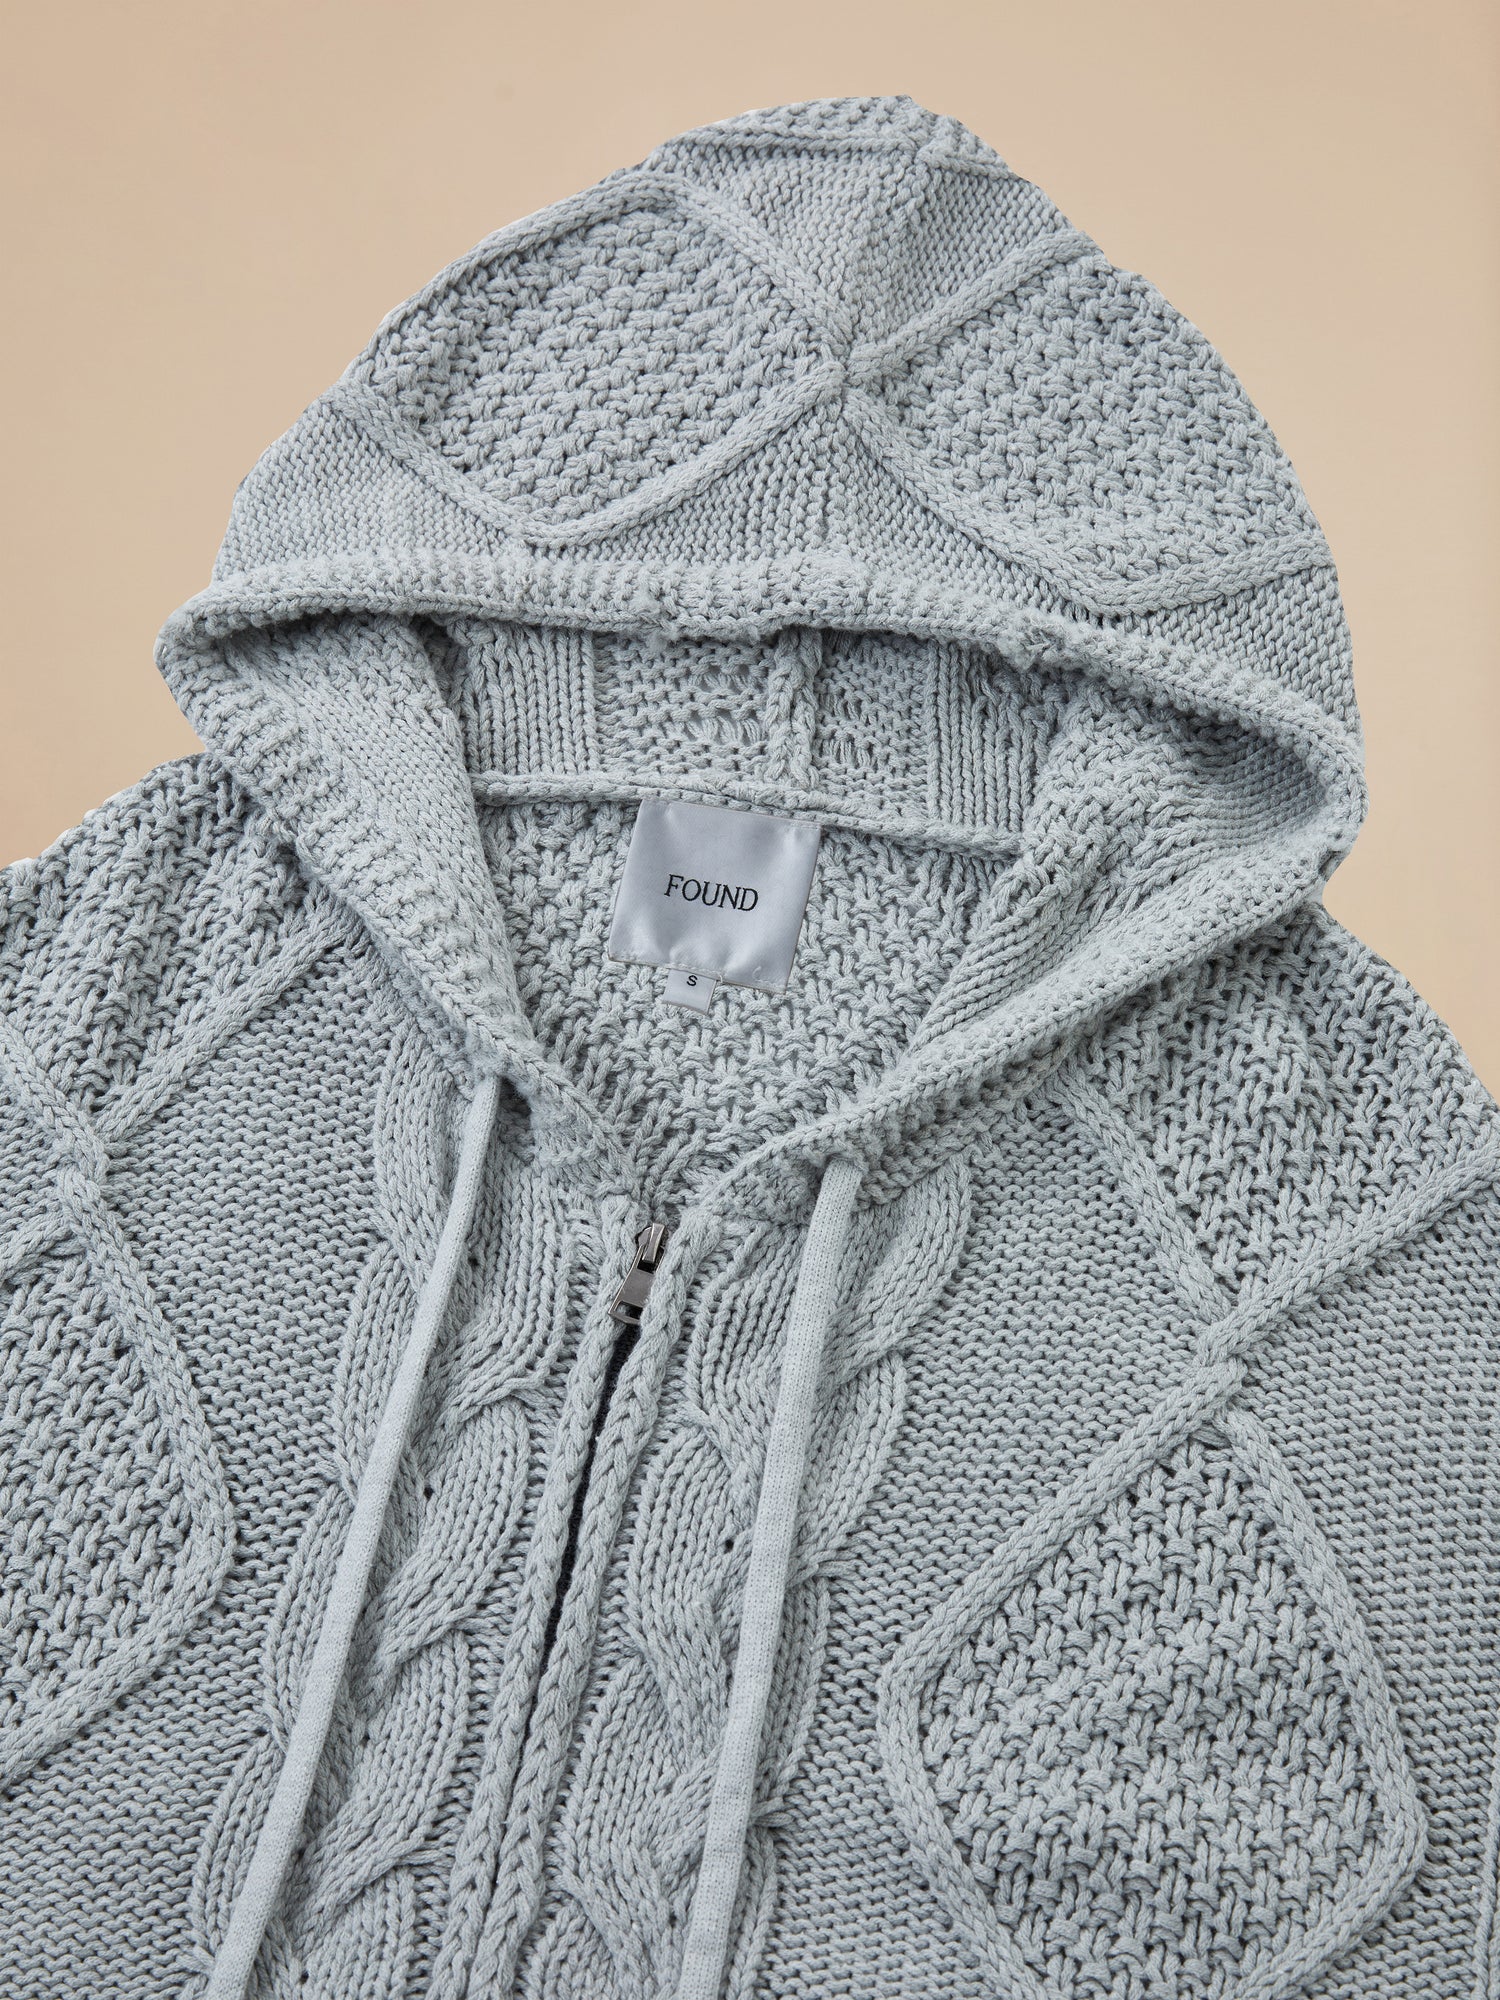 A warm Found Zip Up Distressed Cable Knit Hoodie for comfort.